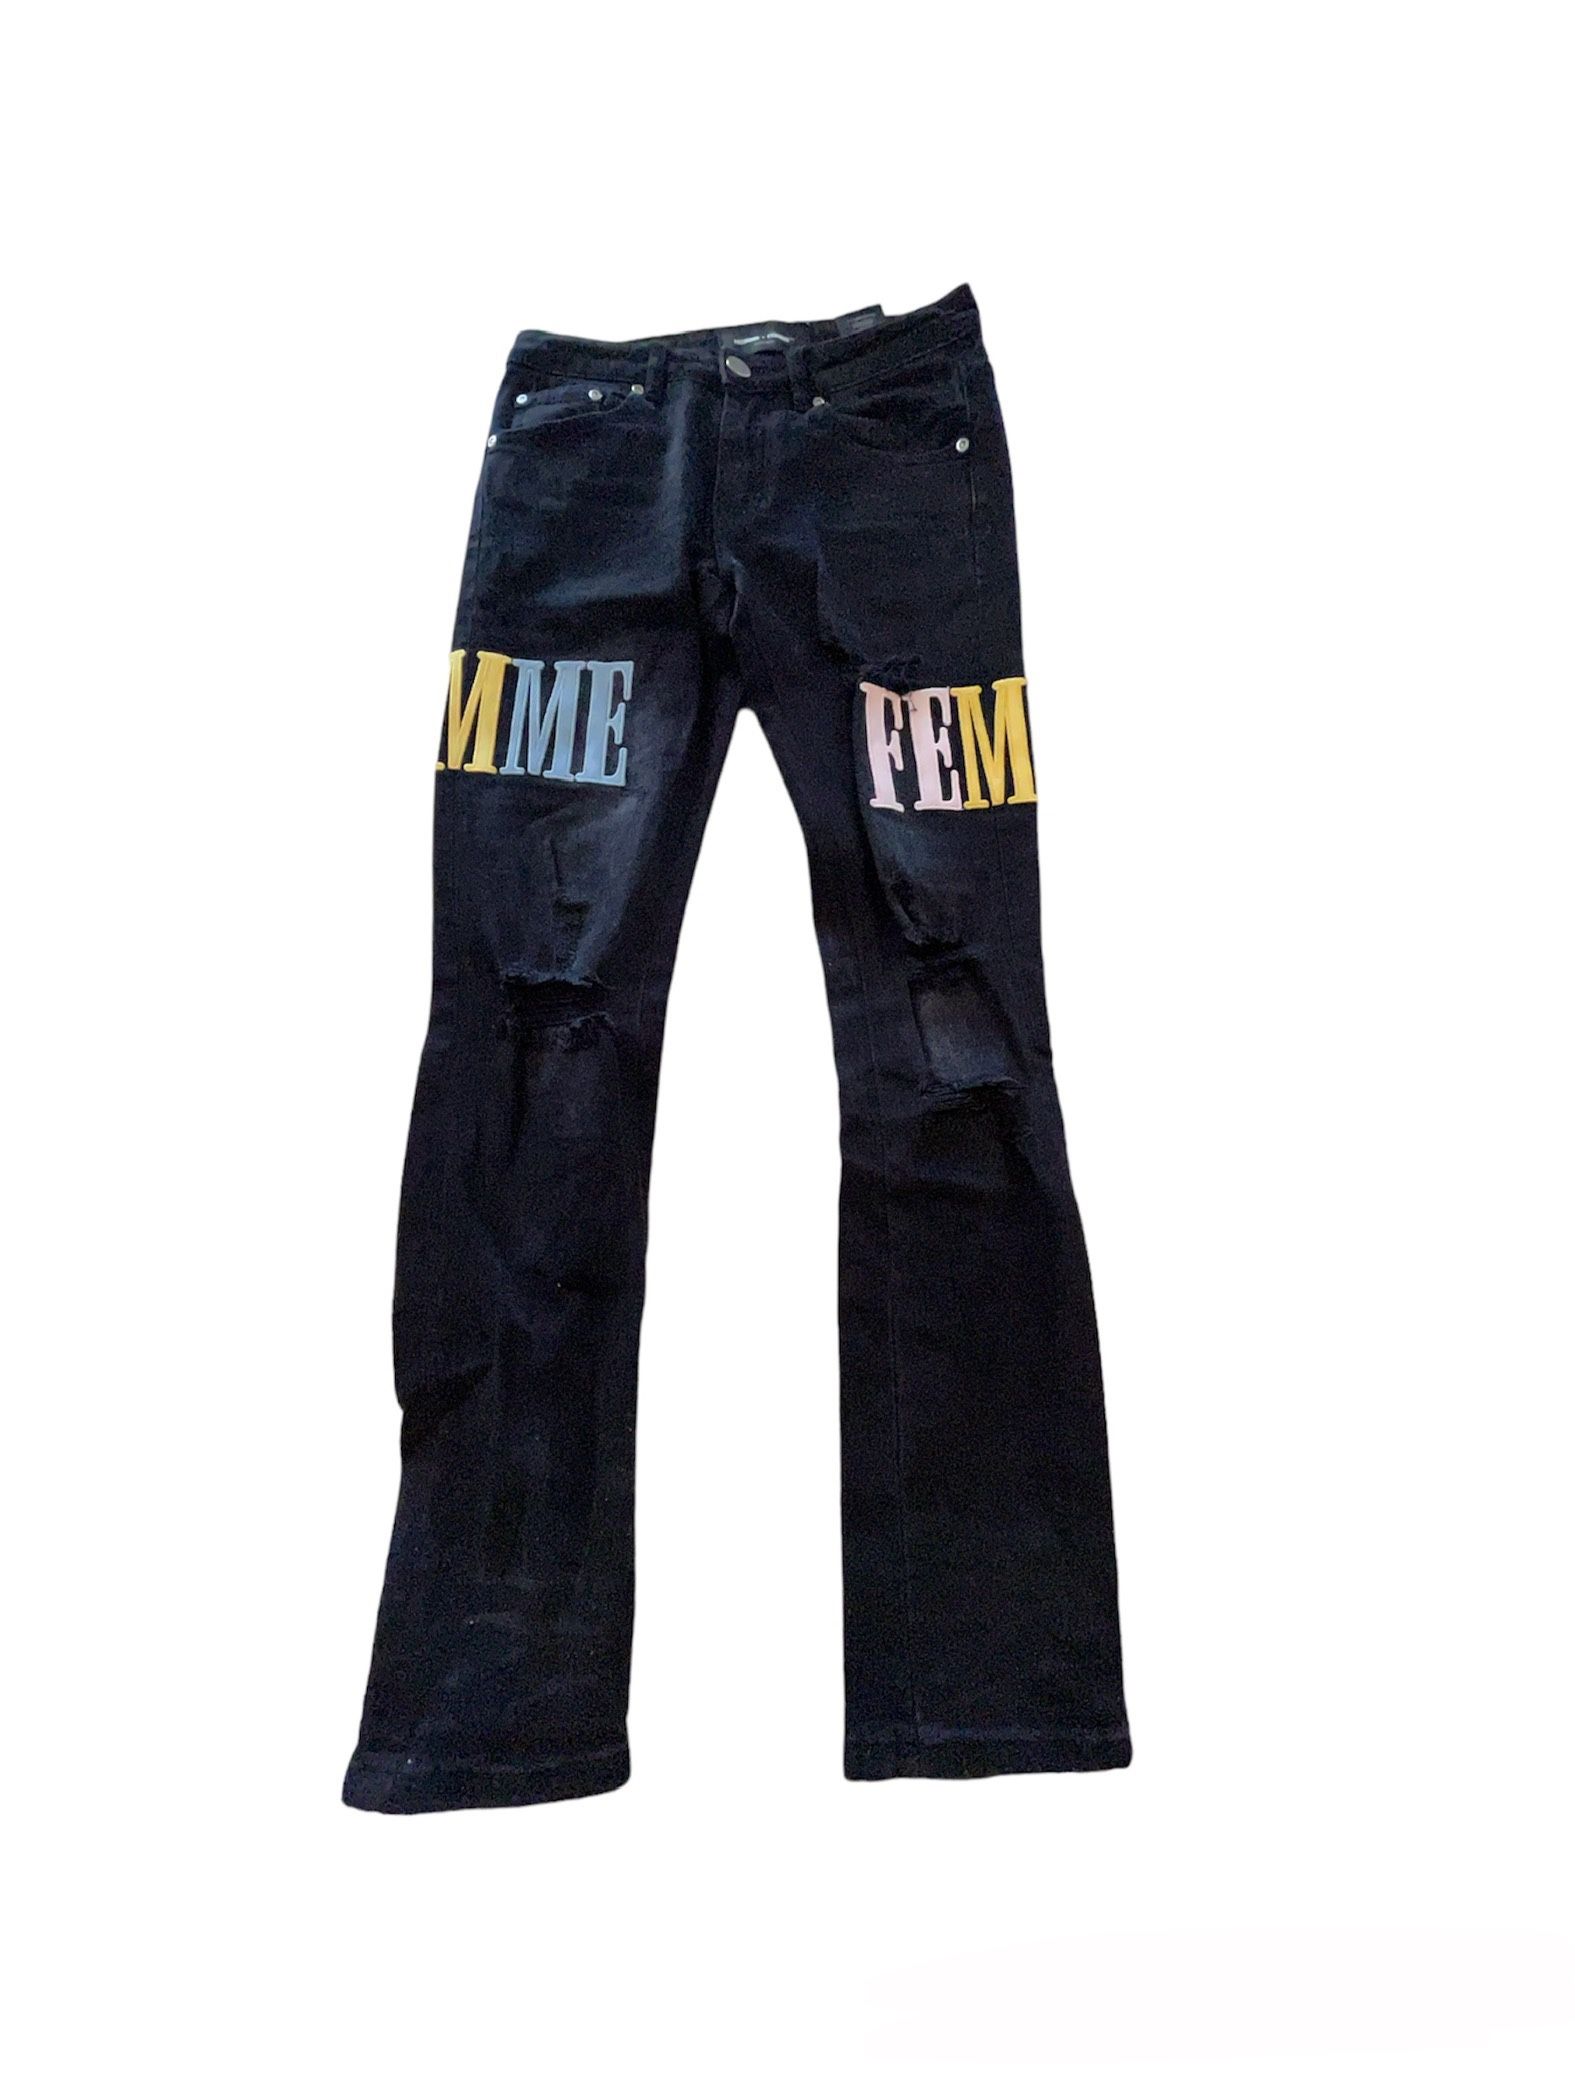 Homme + Femme Rip Jeans